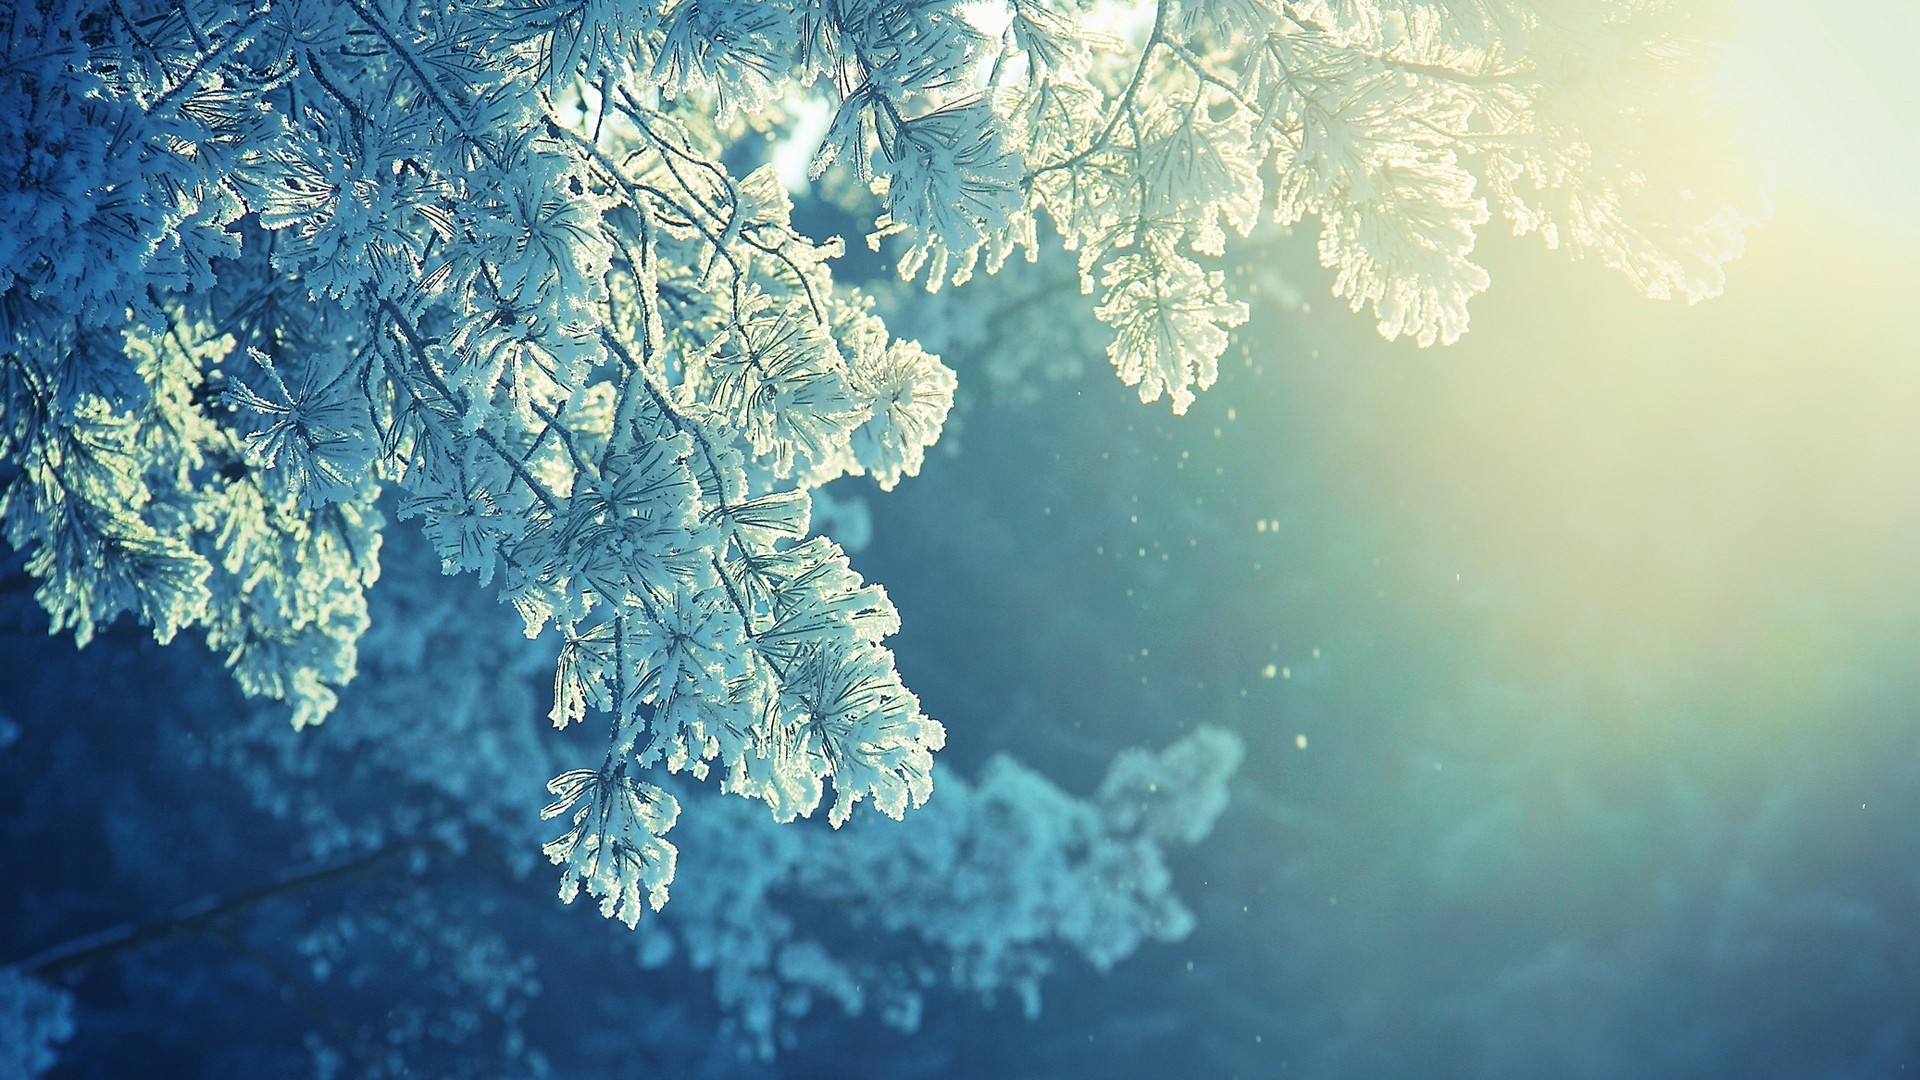 Wallpapers : sunlight, trees, water, nature, reflection, sky, snow, winter, branch, blue, ice, cold, frost, Freezing, light, tree, leaf, flower, season, atmospheric phenomenon, woody plant 1920x1080